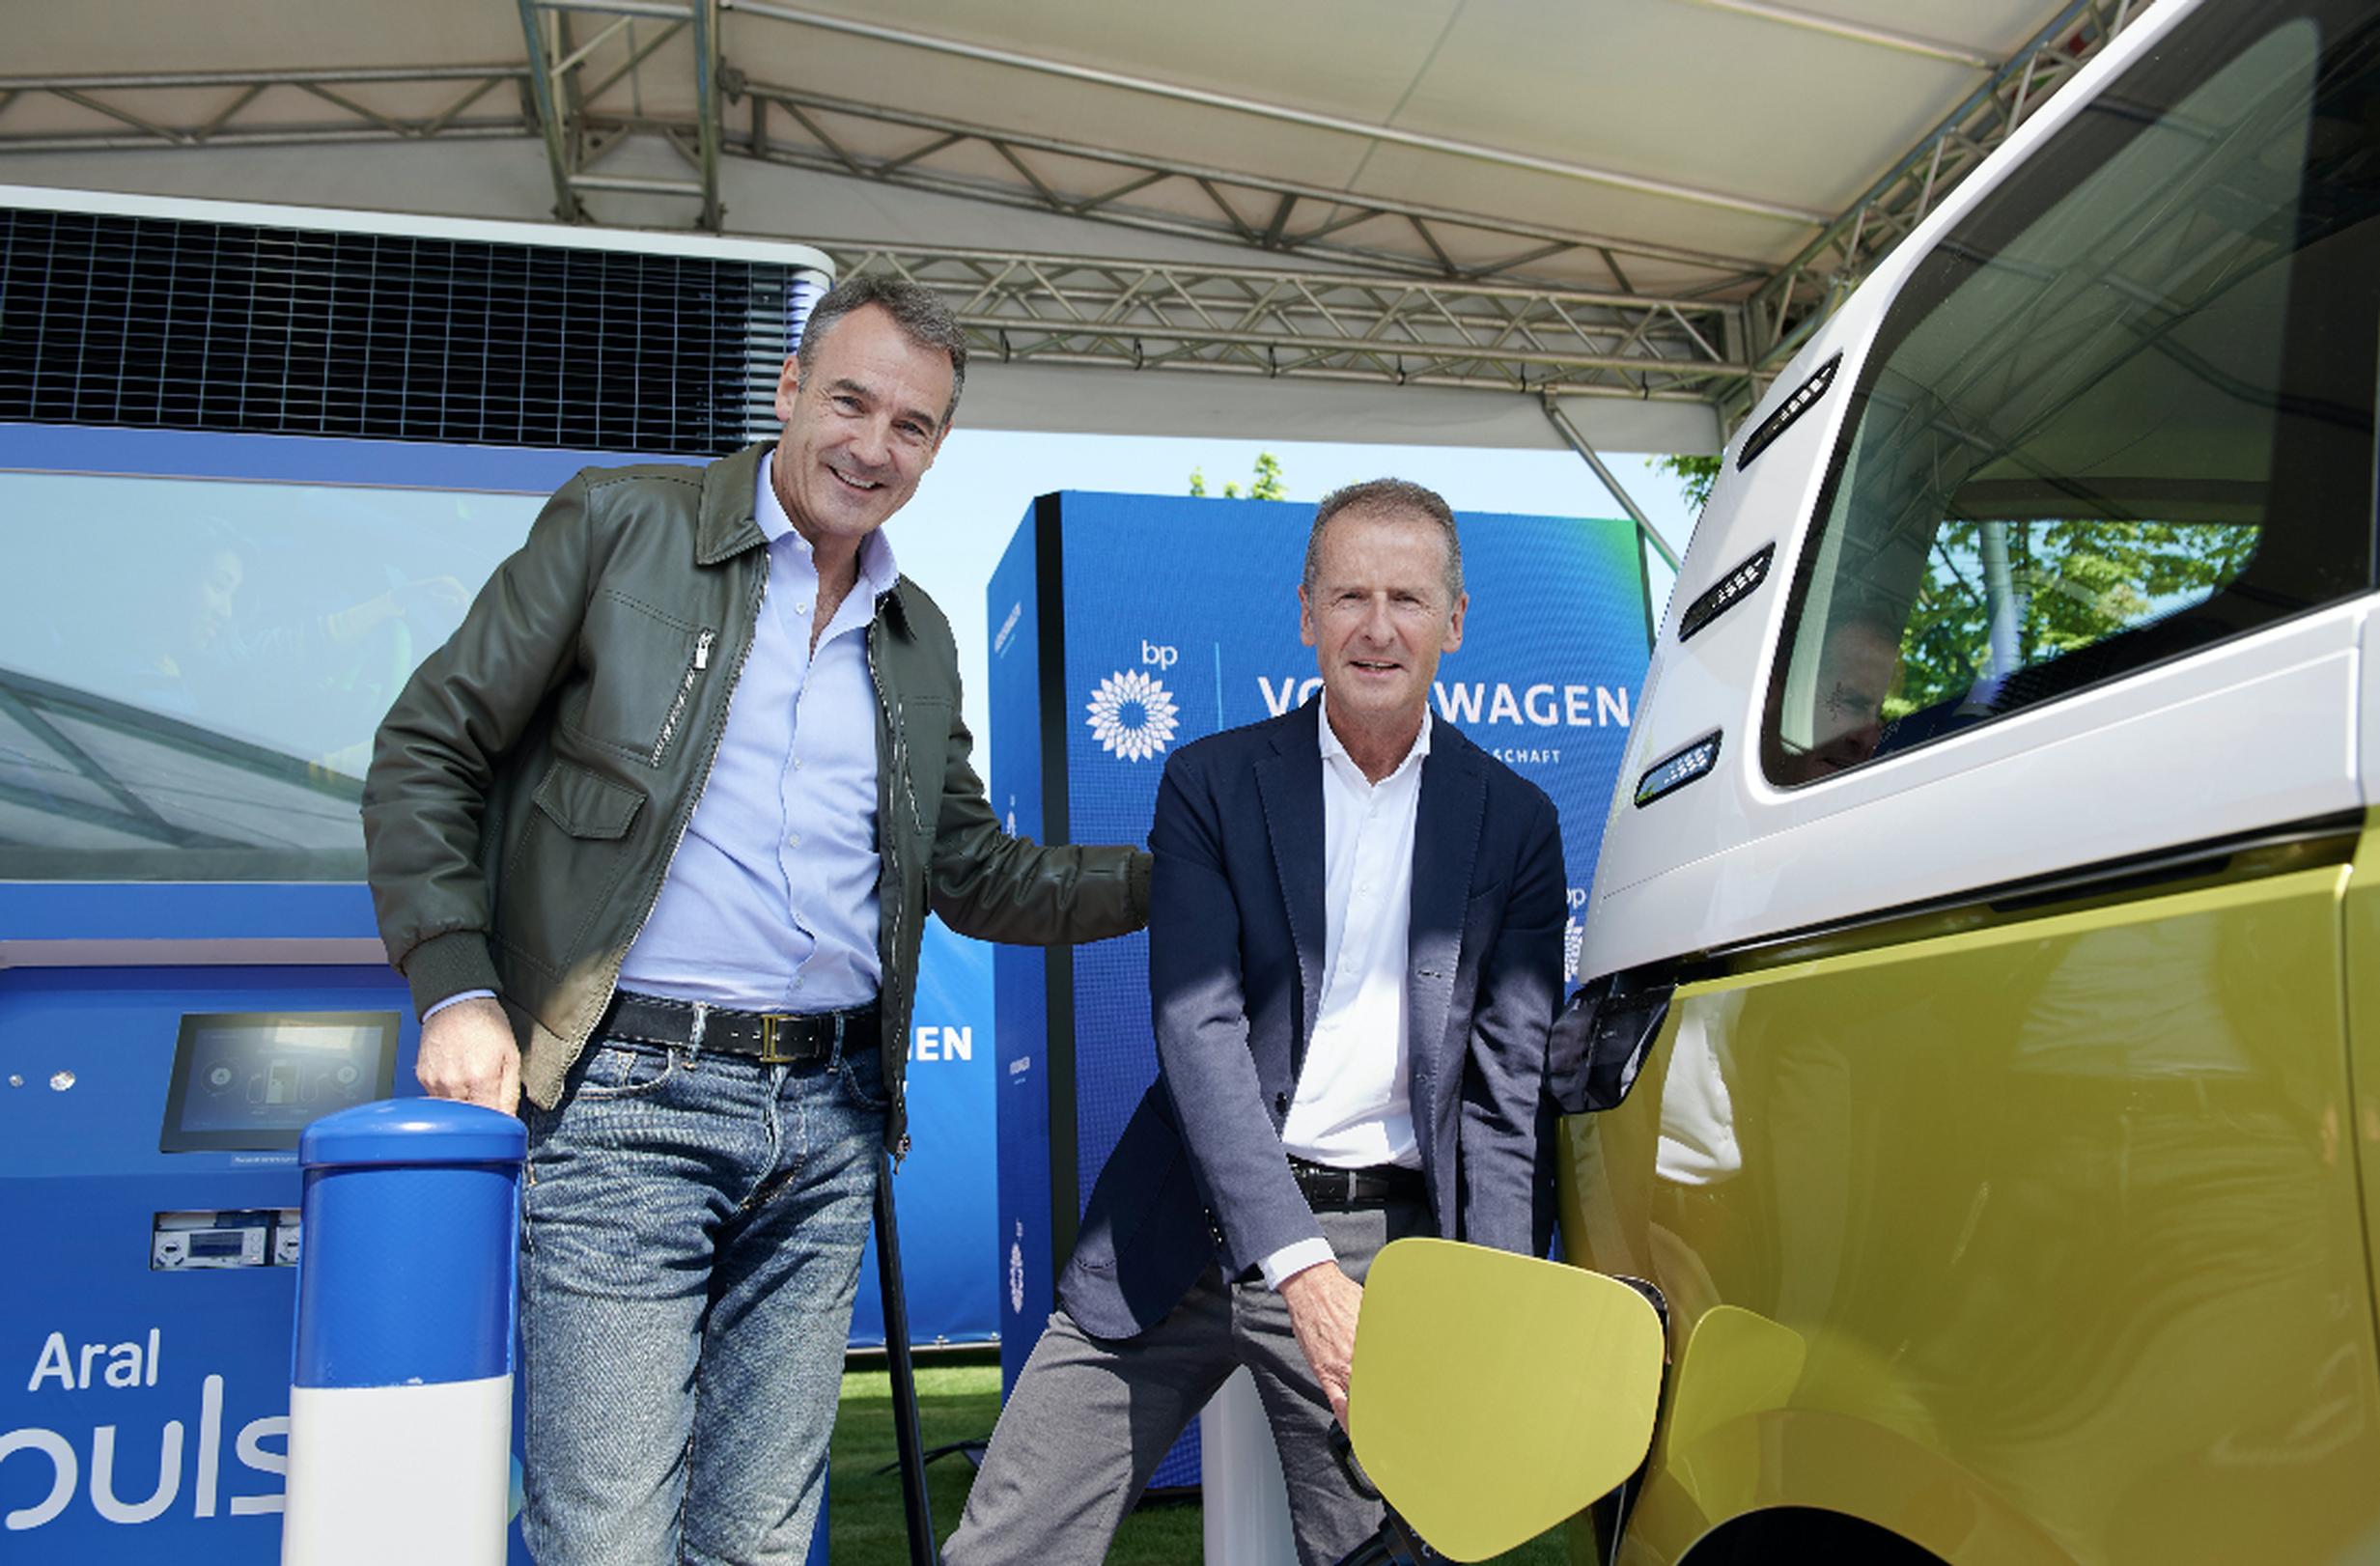 Bernard Looney and Herbert Diess launched the first BP/Aral flexpole fast charger in Dusseldorf